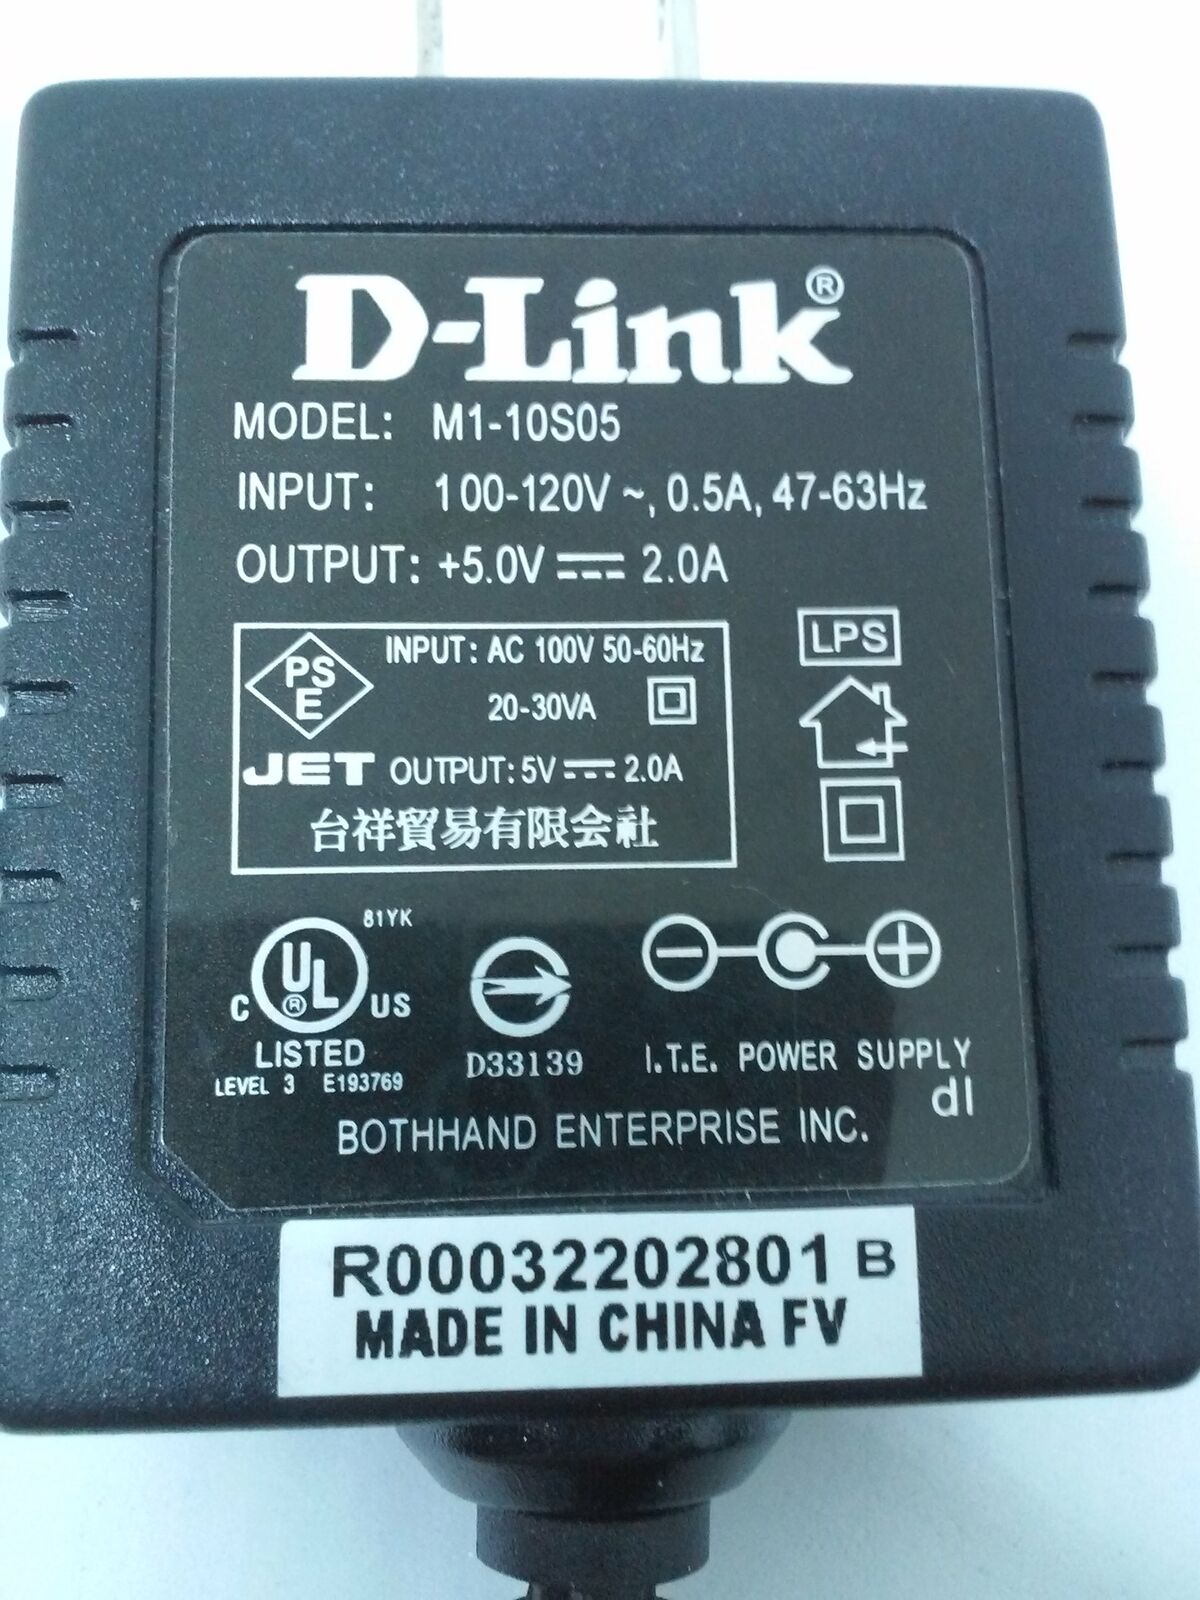 NEW D-Link M1-10S05 5V 2A AC DC Power Adapter Supply